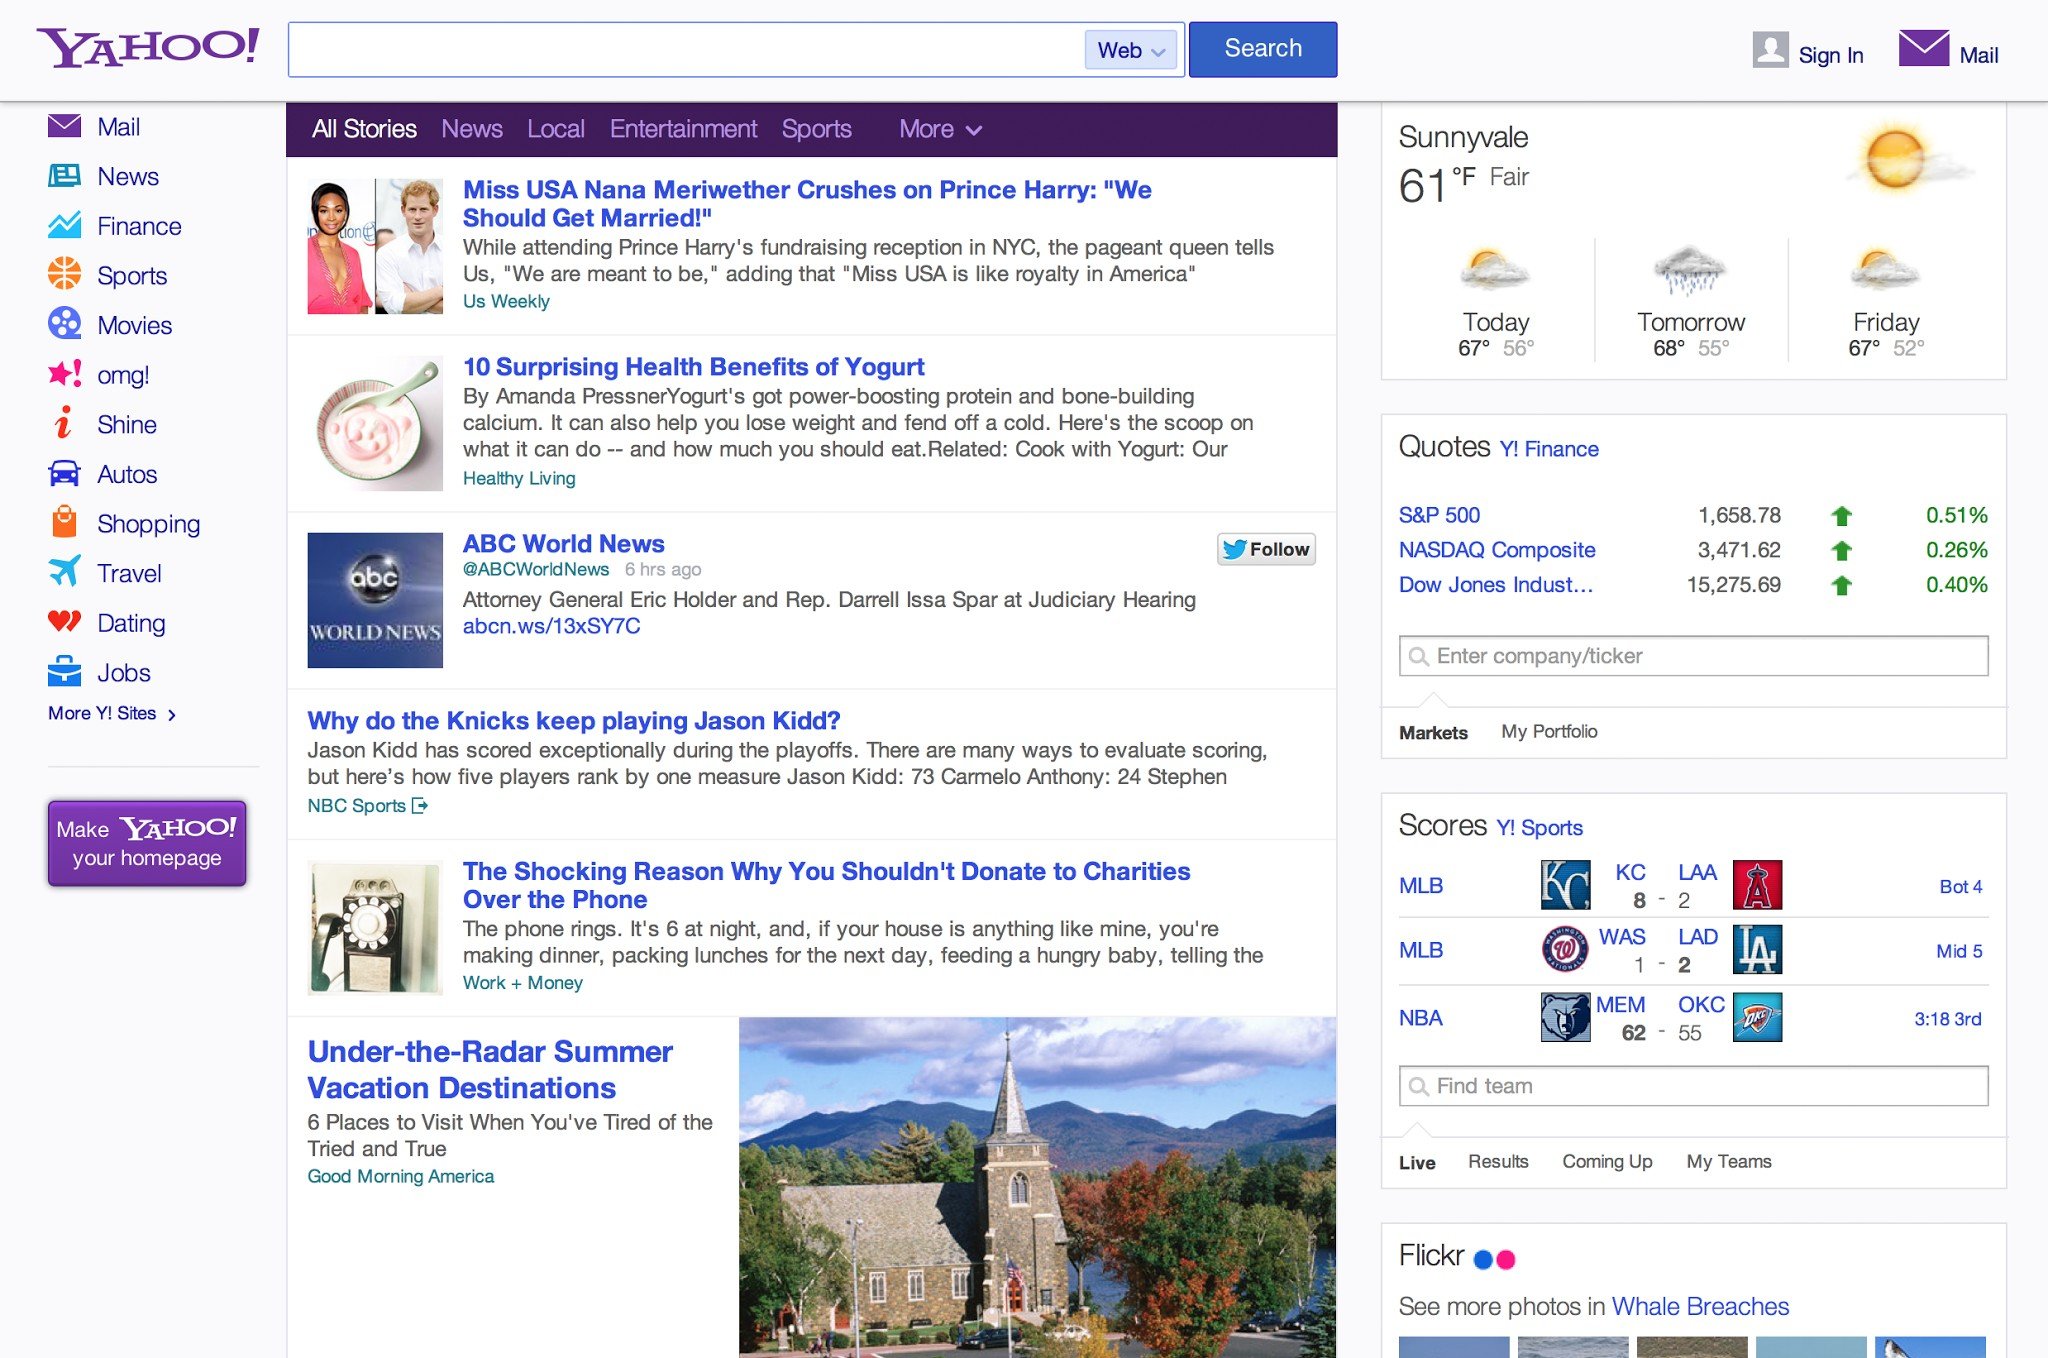 Yahoo Partners With Twitter To Bring Tweets Into Its Newsfeed